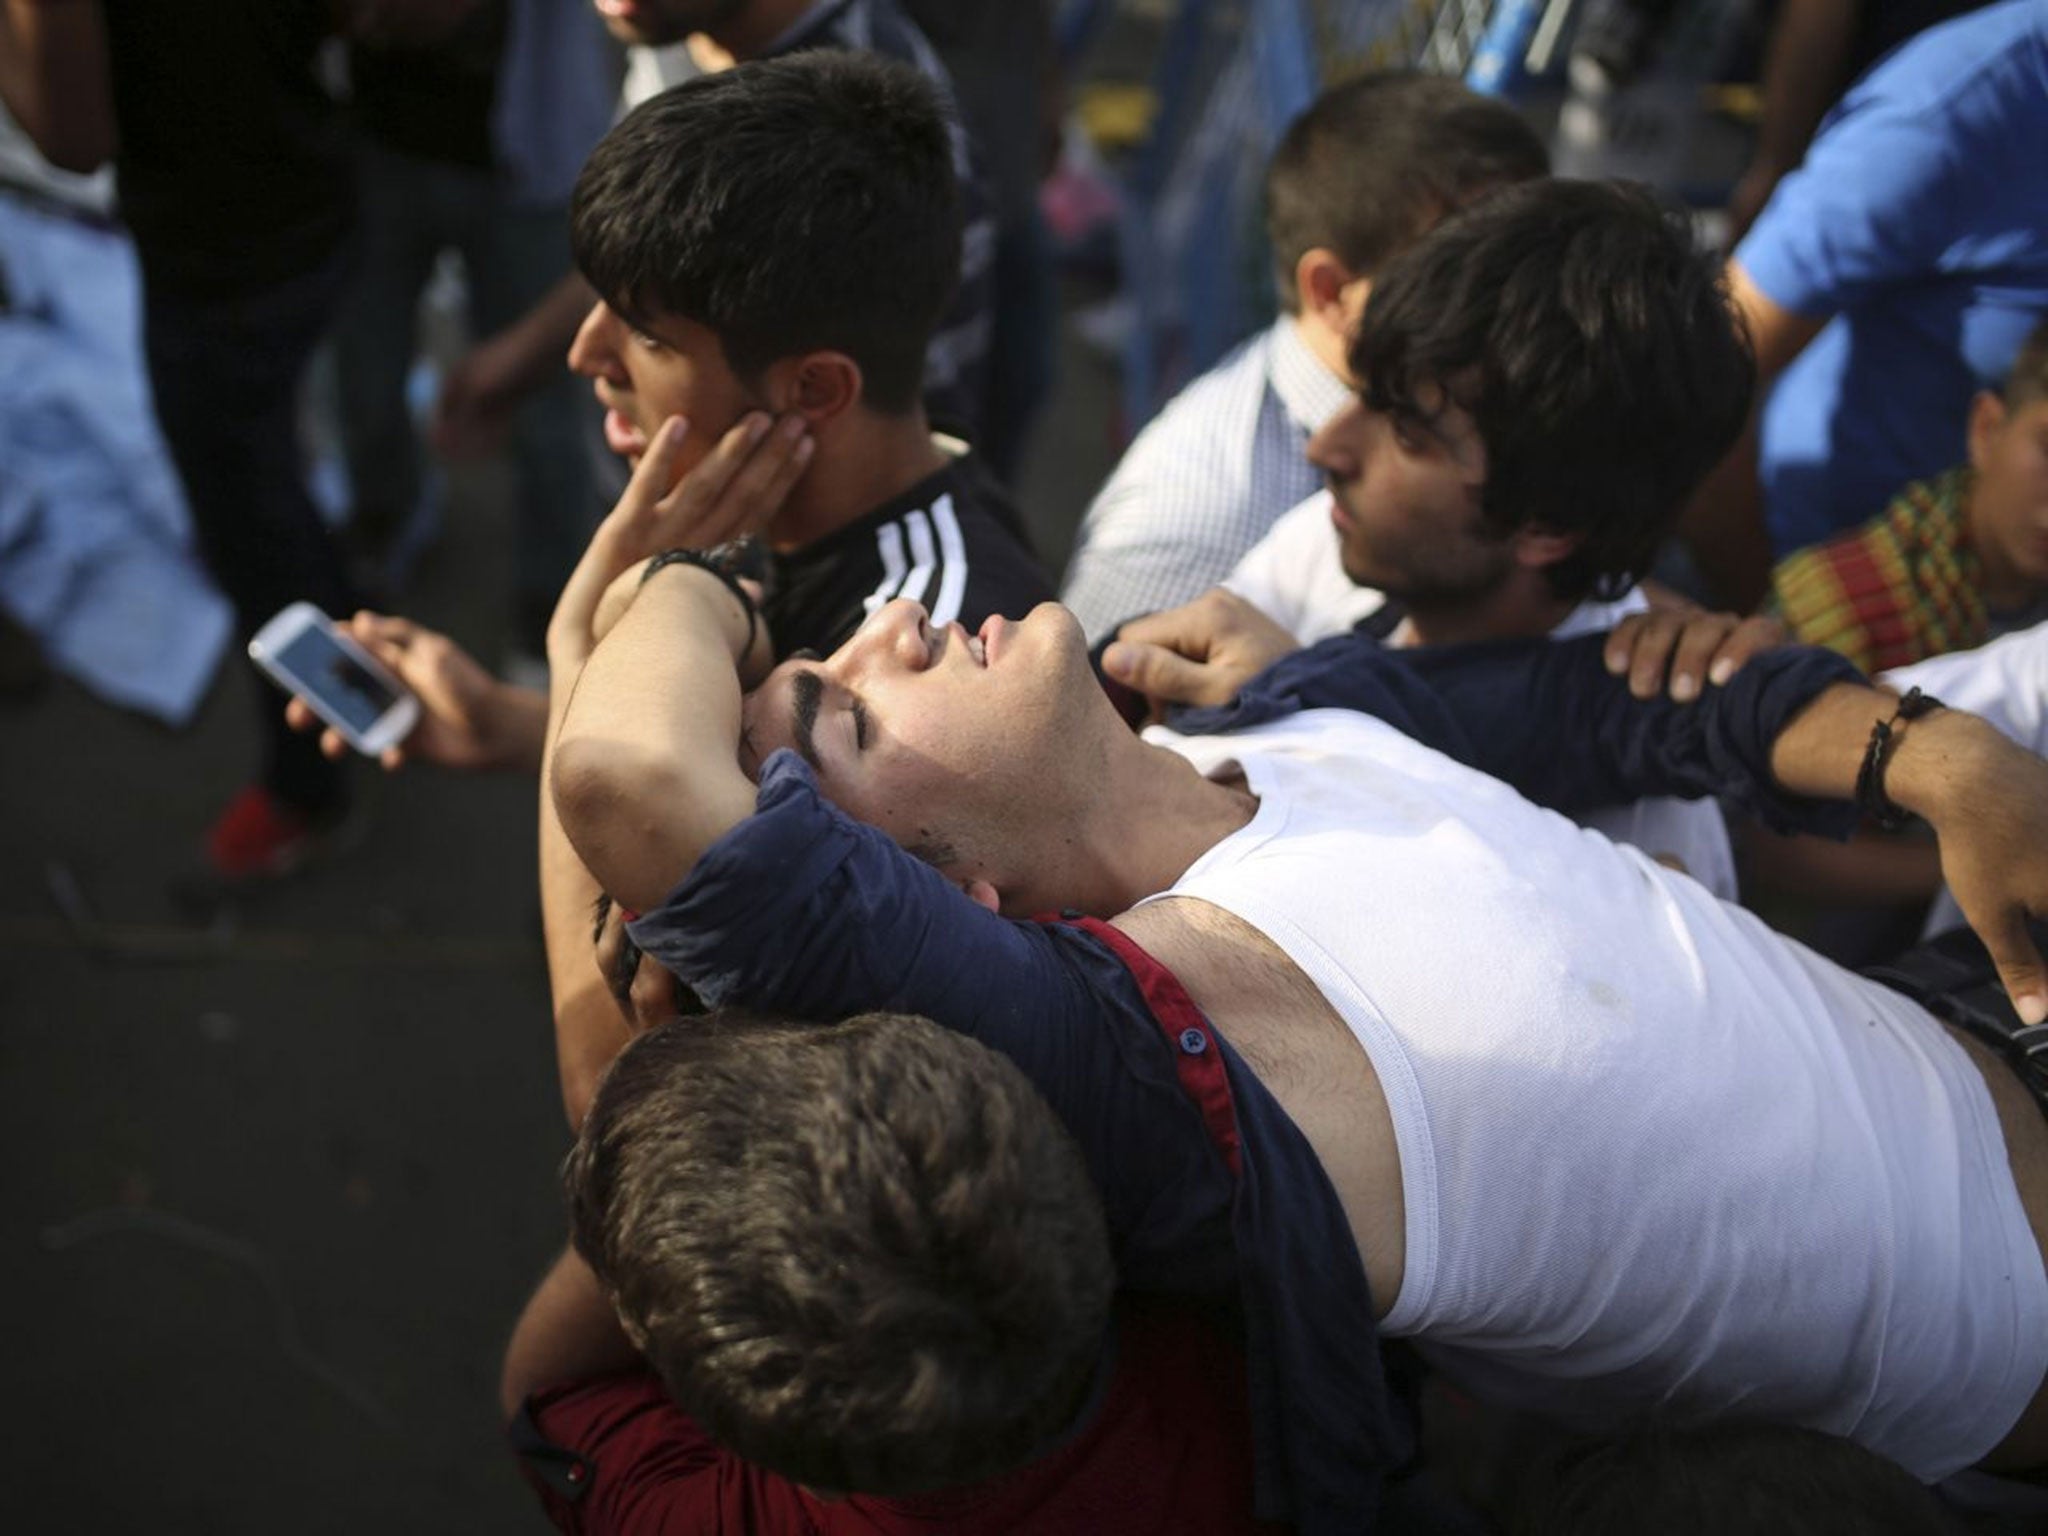 People carry a youth, wounded during an explosion at a pro-Kurdish Peopleís Democratic Party (DHP) rally in Diyarbakir (Image: Emre Tazegul/PA)